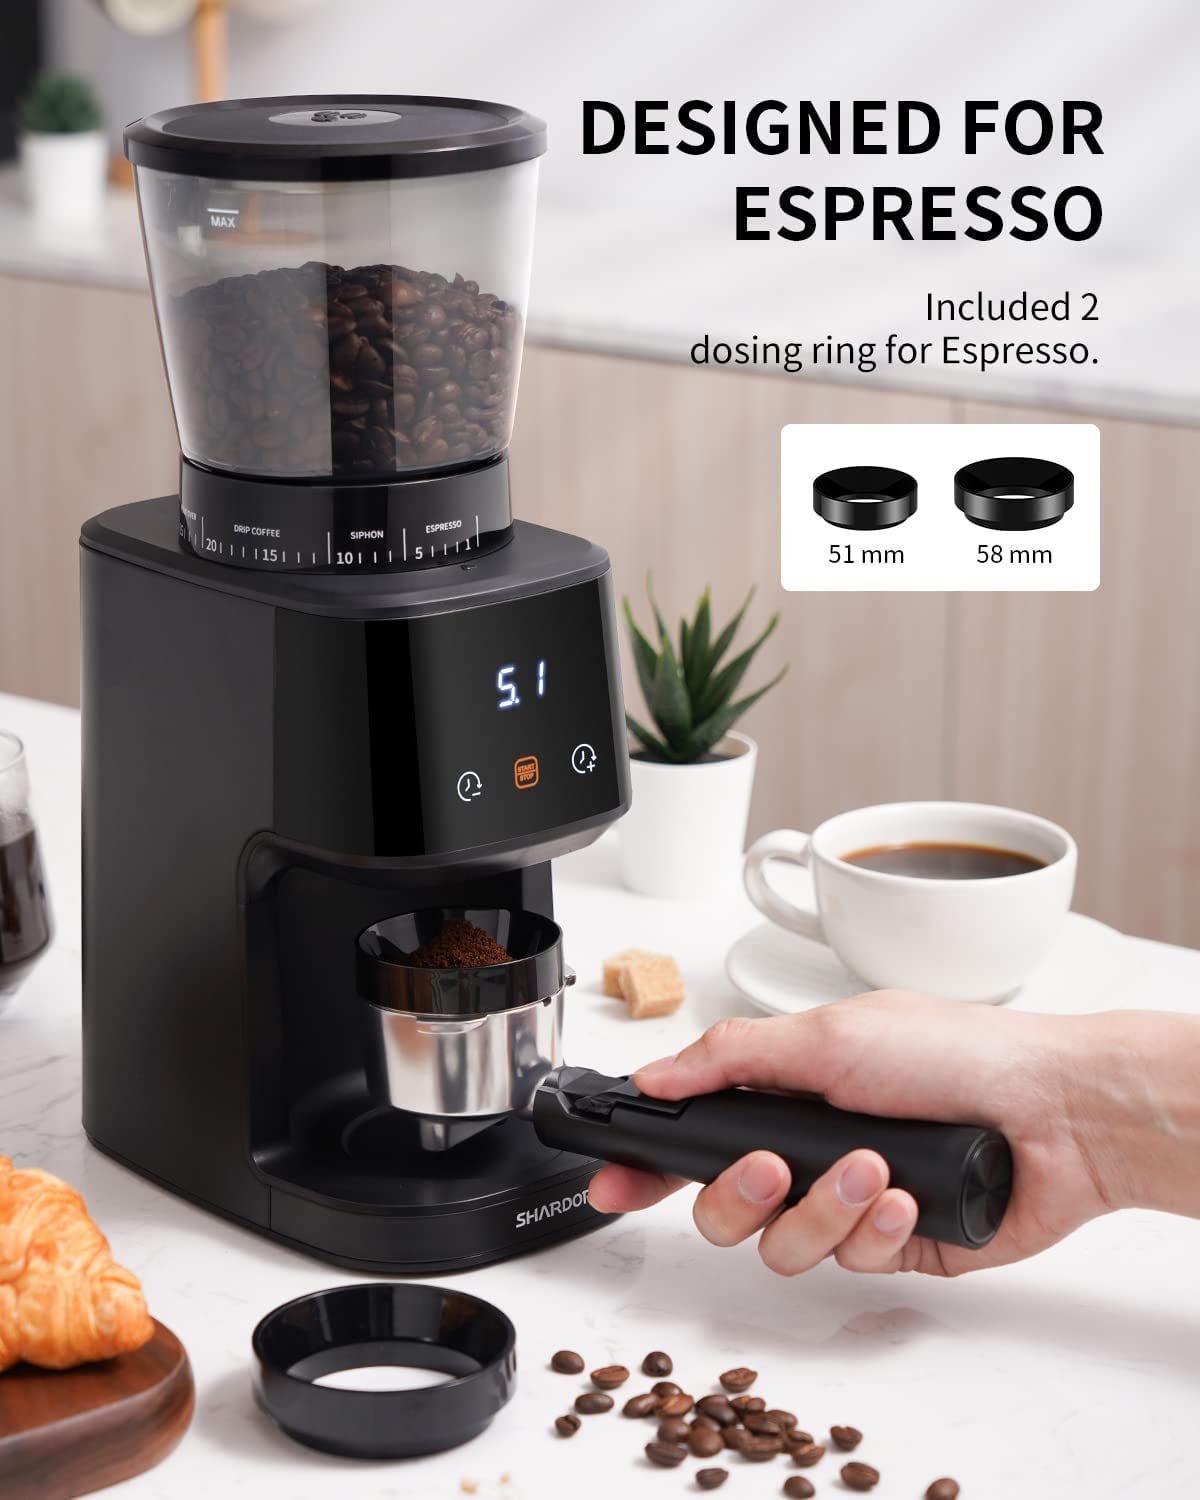 Minoto Electric Ceramic Conical Burr Coffee Grinder - 5 Adjustable Grind Settings - Whole Bean Mill for Aeropress, Drip Coffee, Espresso, French